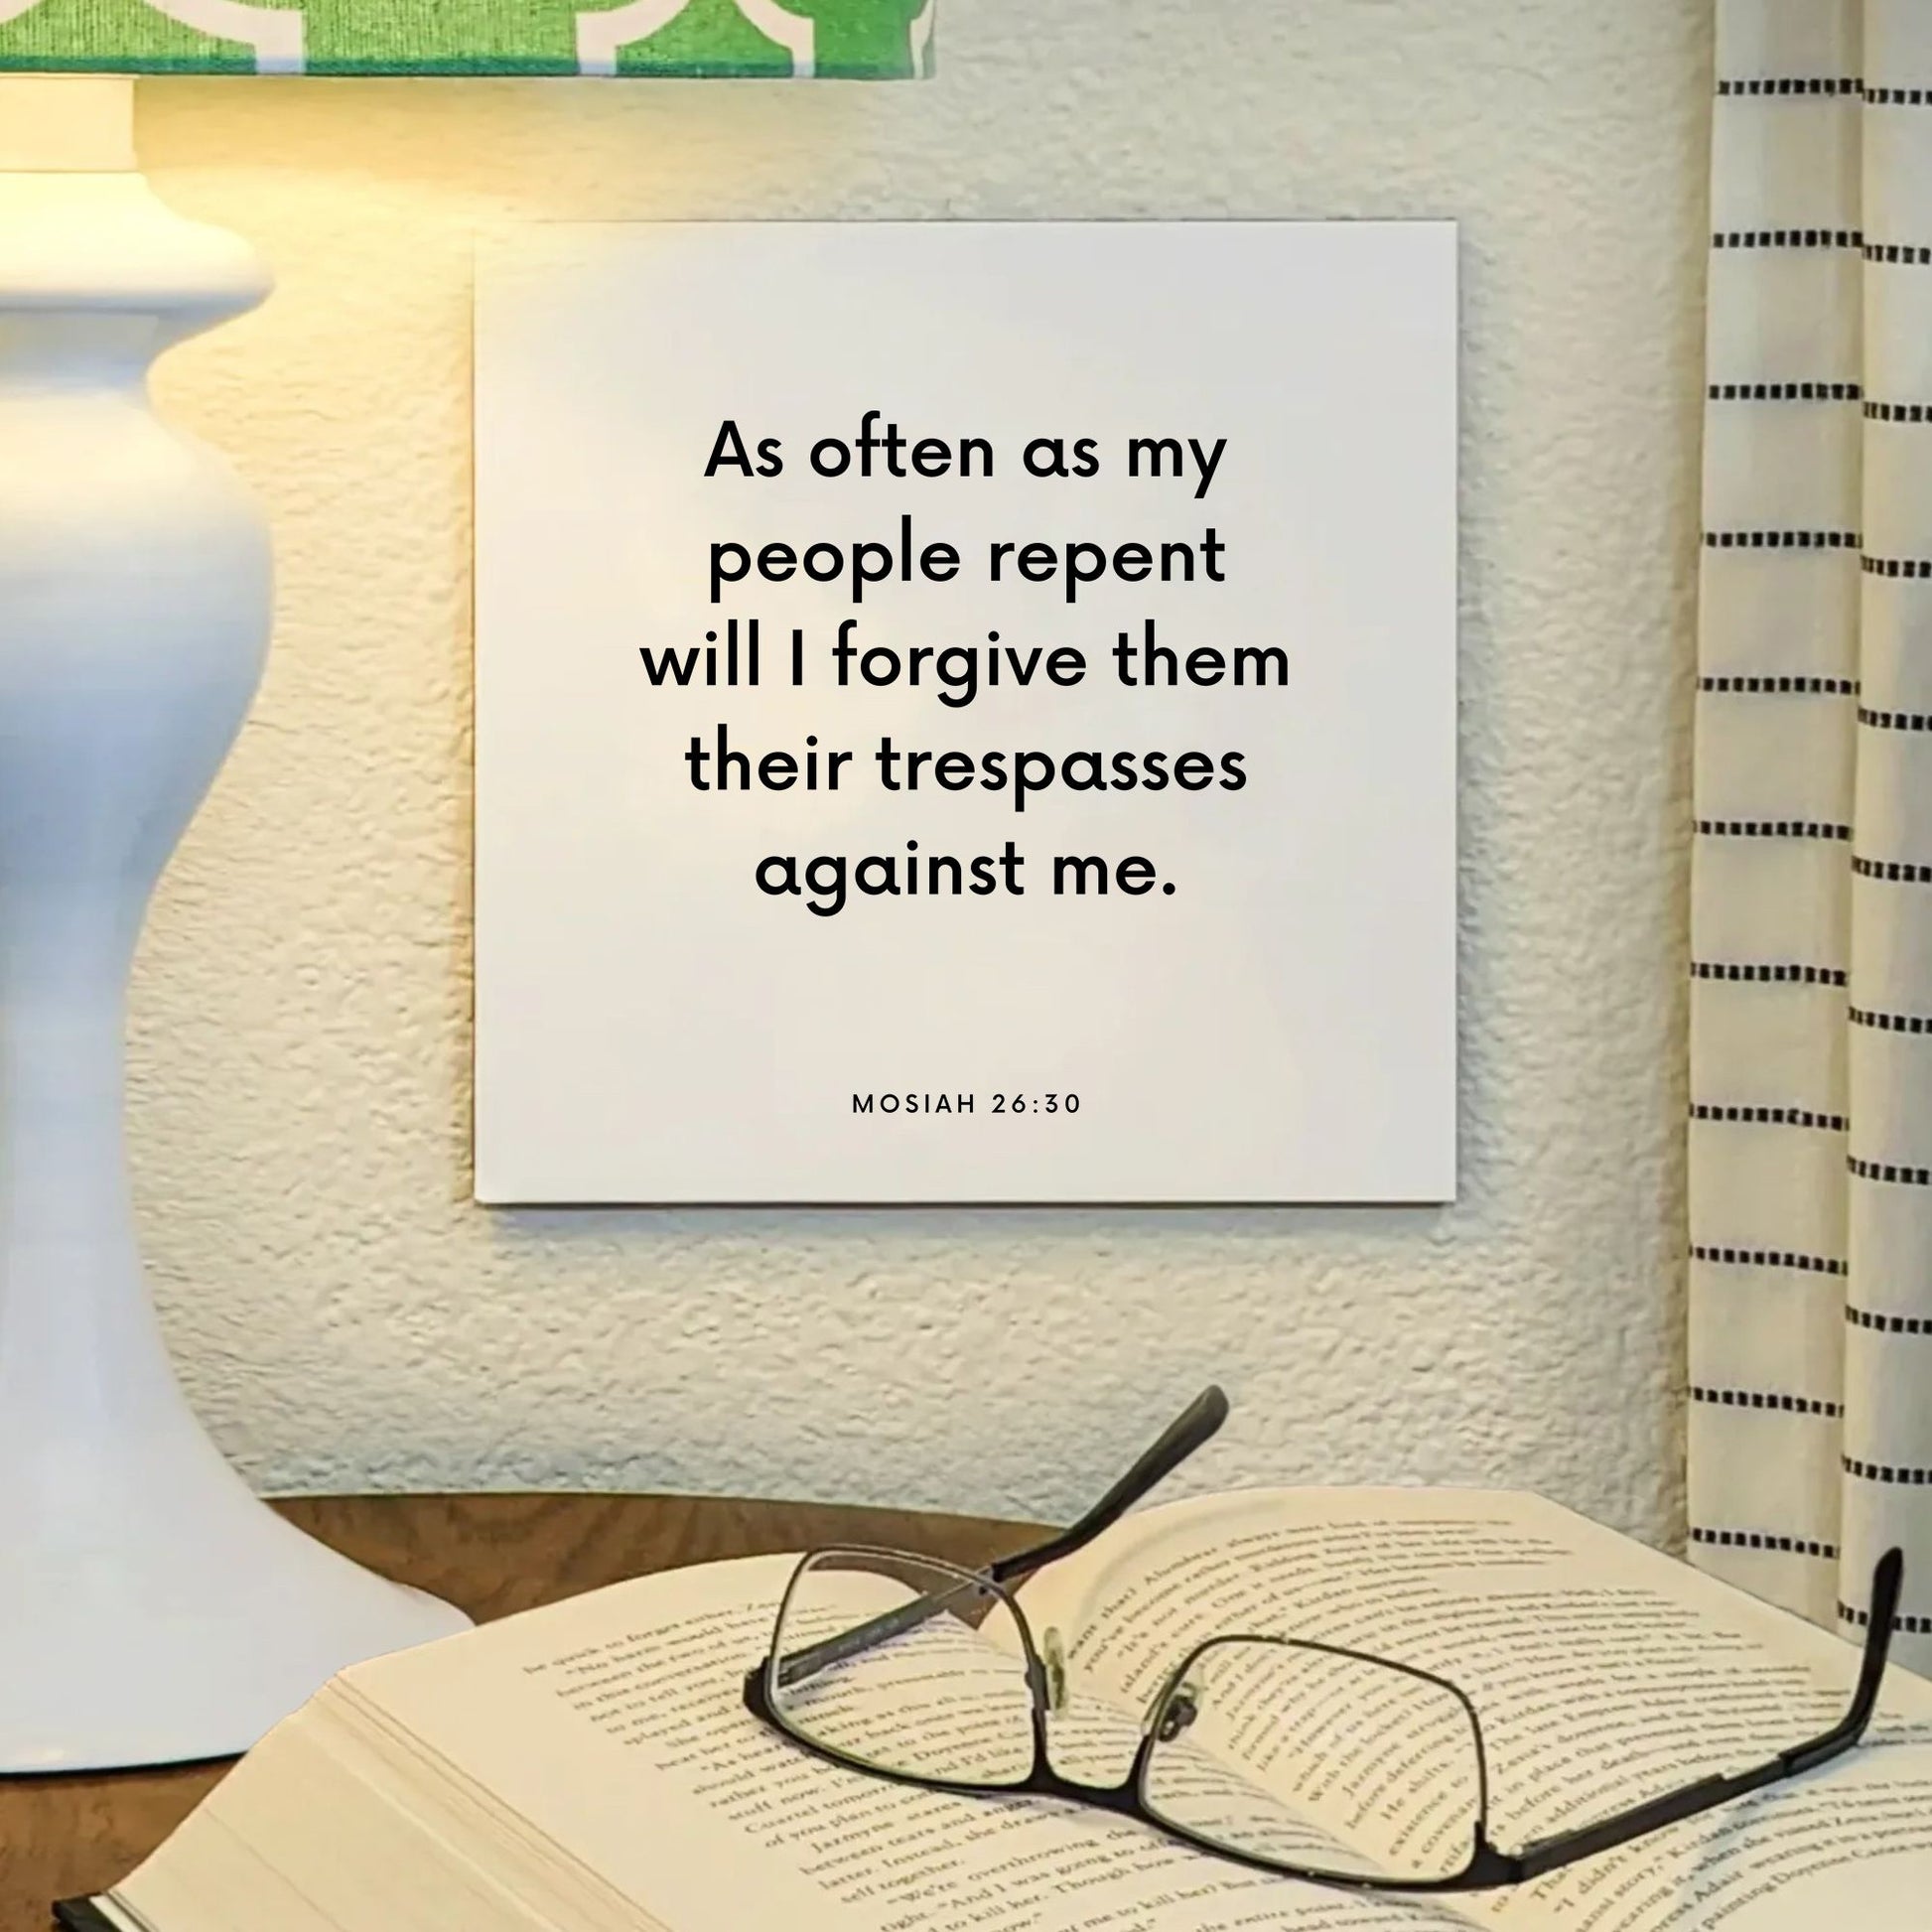 Lamp mouting of the scripture tile for Mosiah 26:30 - "As often as my people repent will I forgive them"